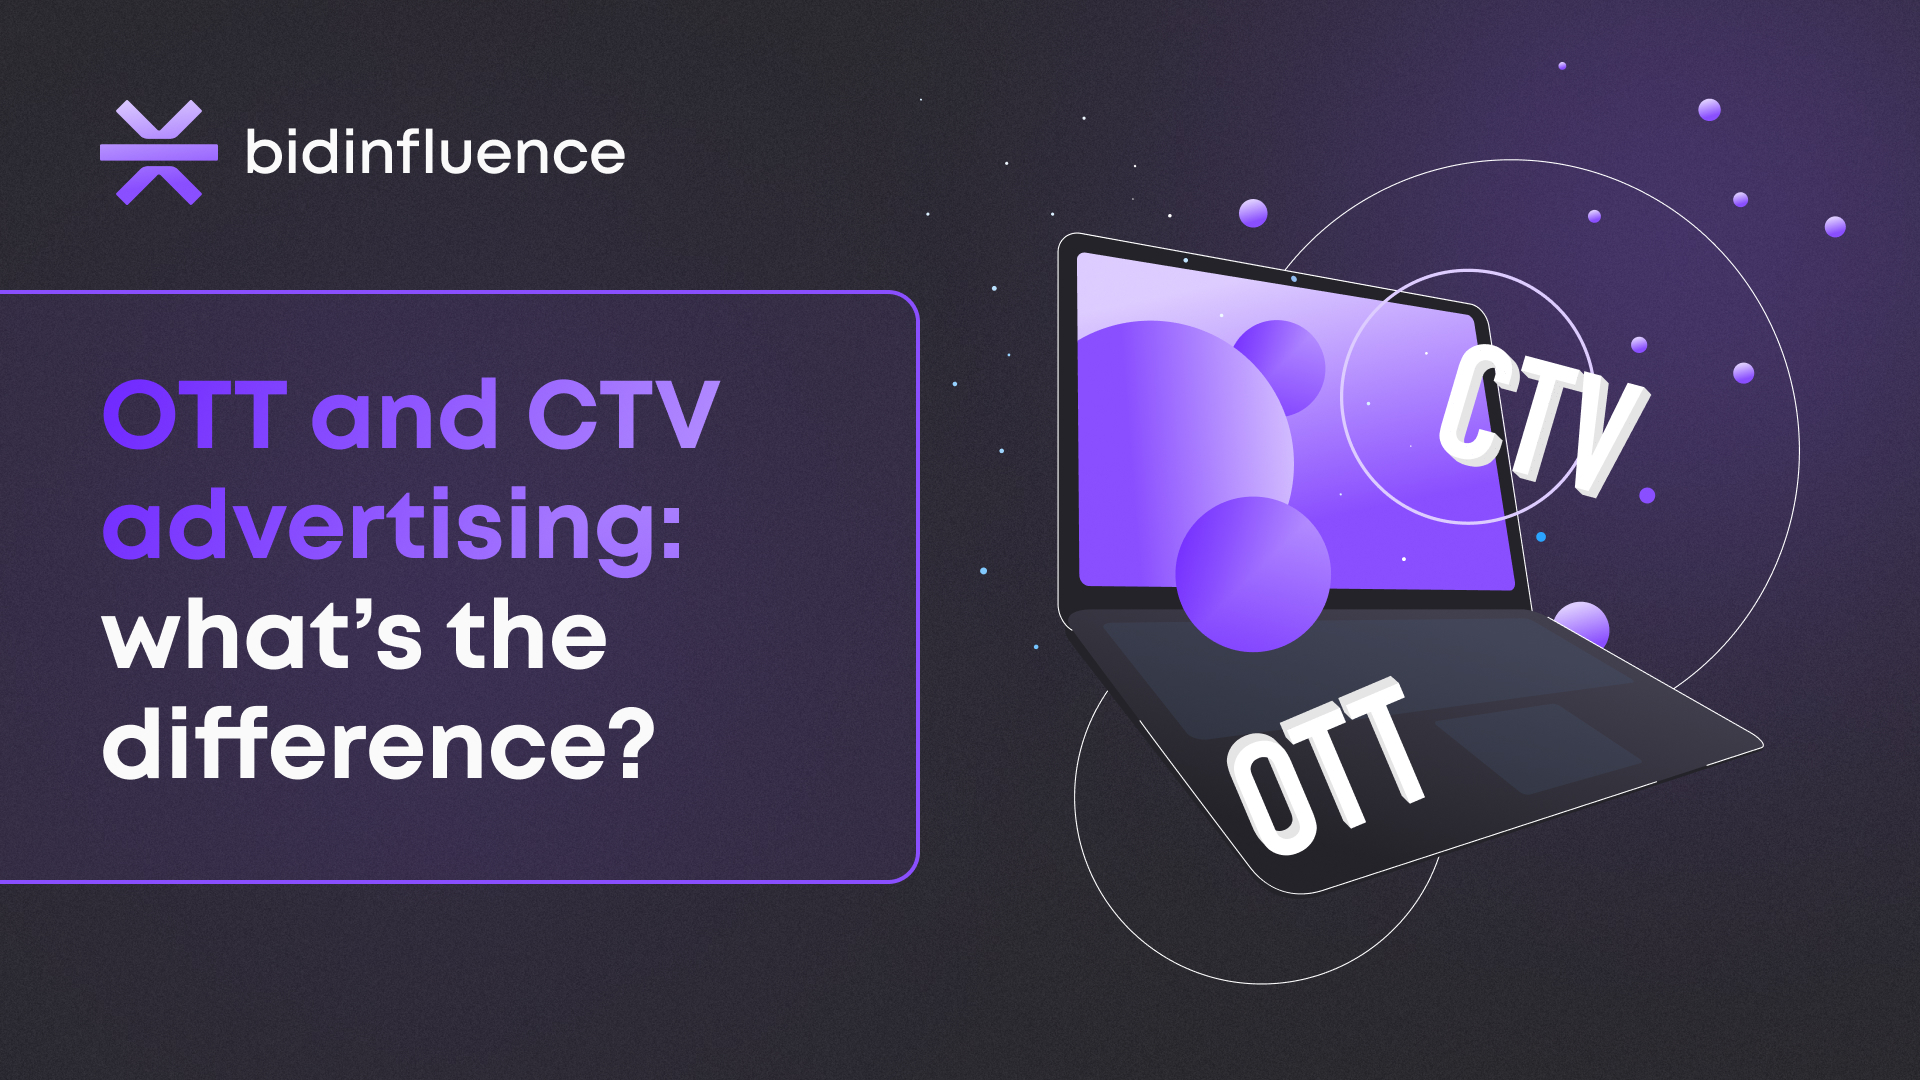 OTT and CTV advertising. What is the difference?